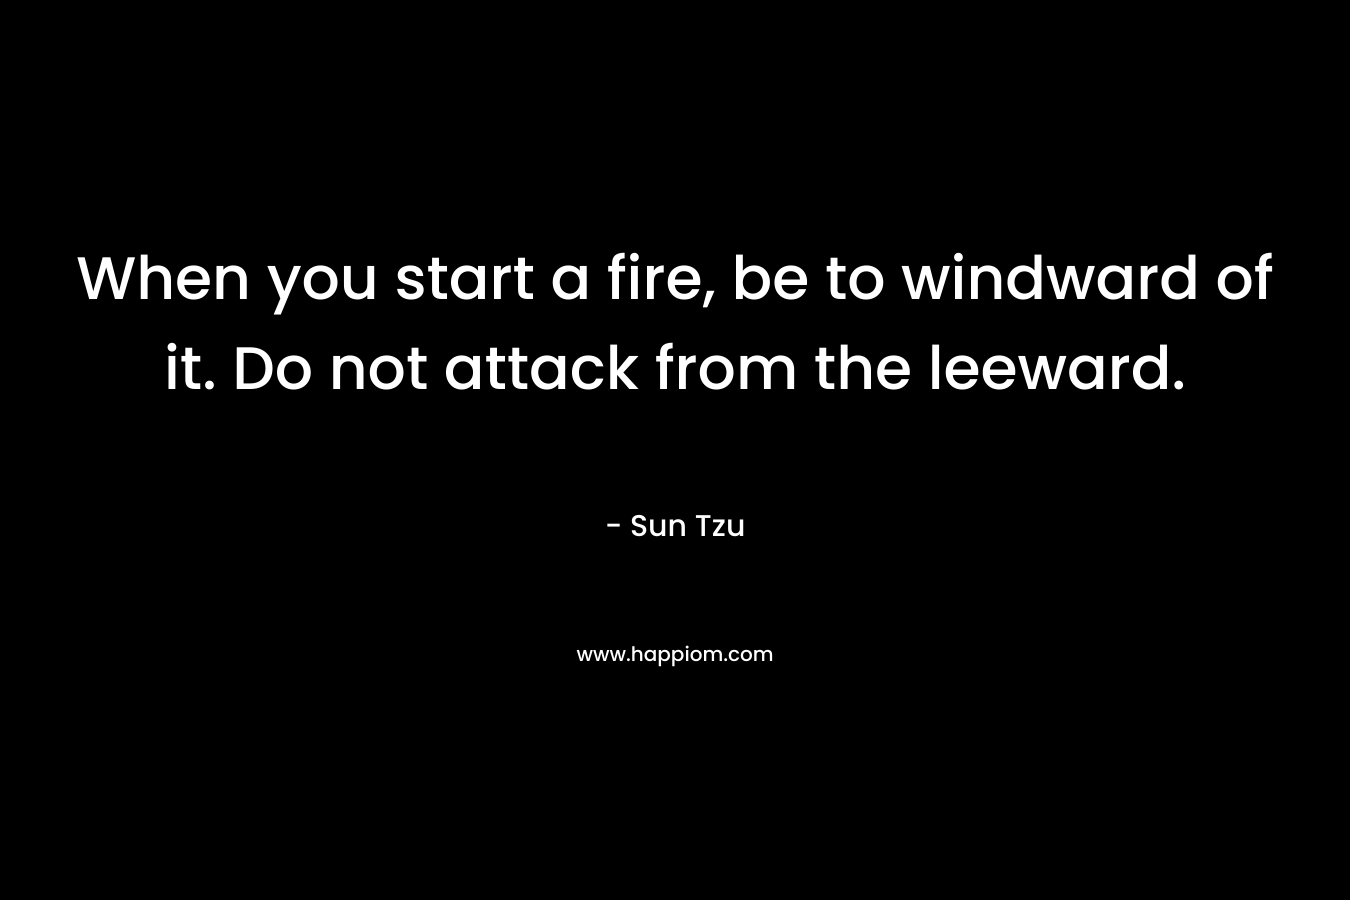 When you start a fire, be to windward of it. Do not attack from the leeward.